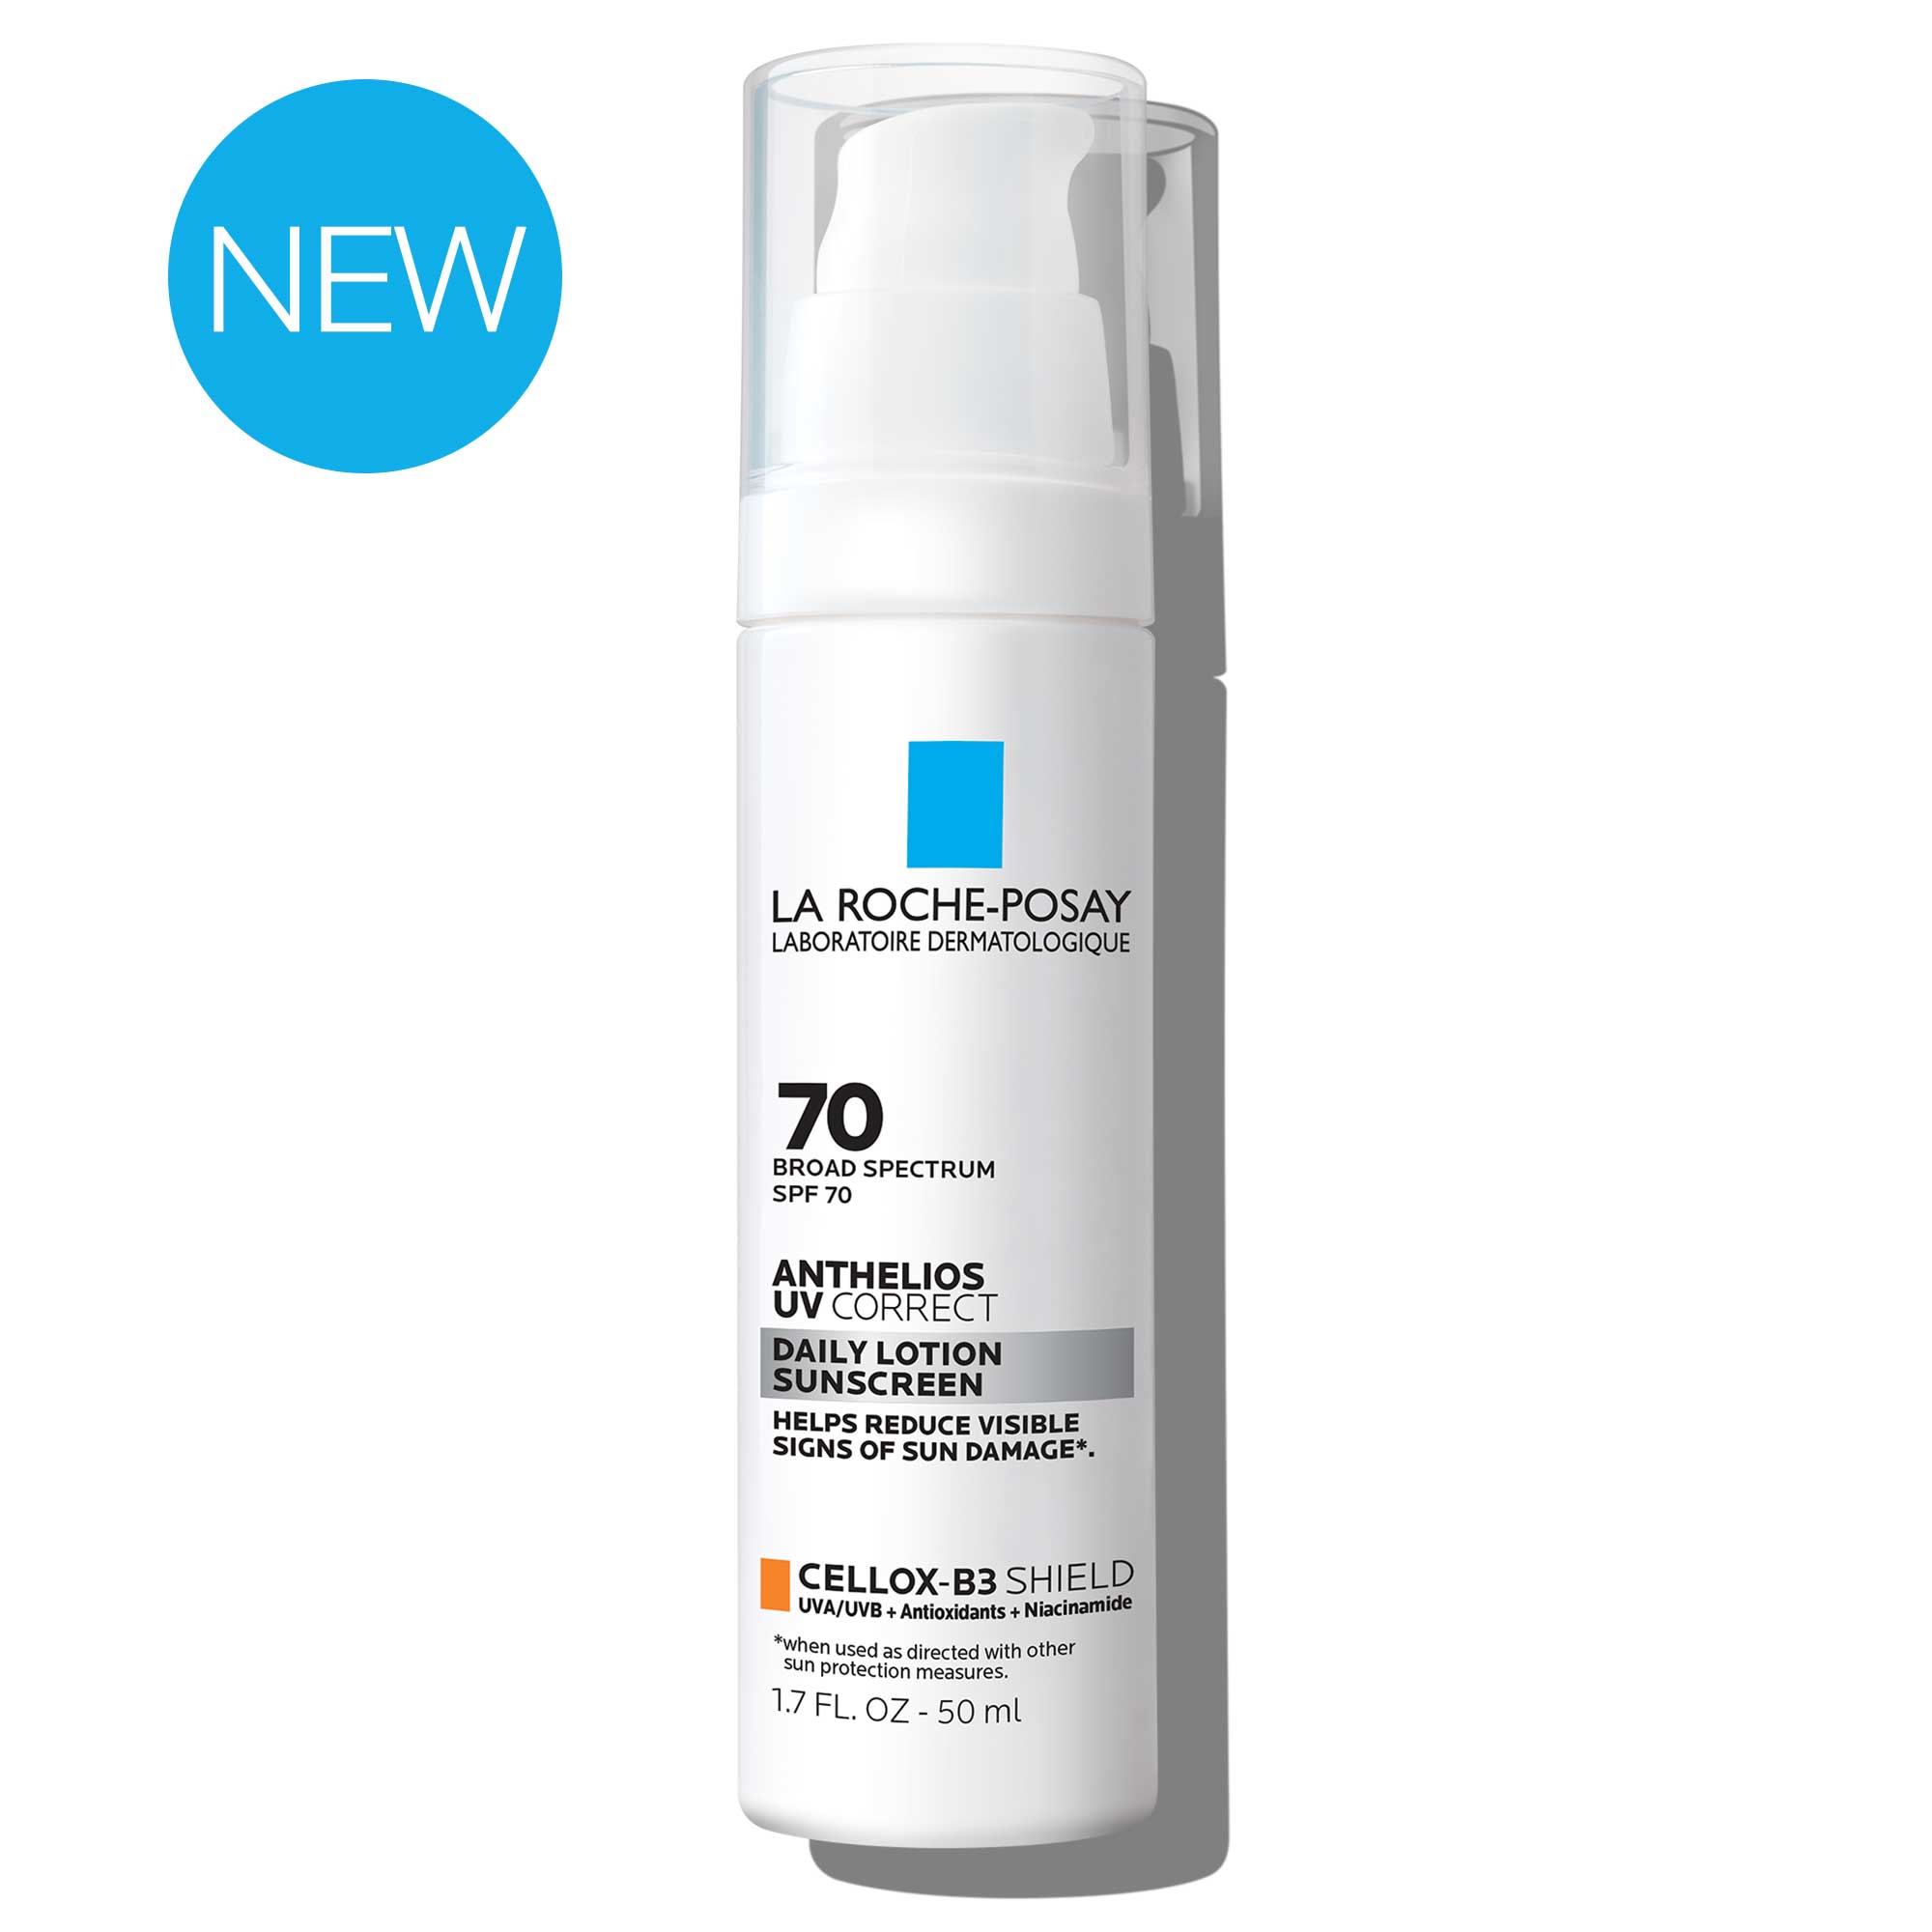 La Roche-Posay - Anthelios UV Correct Face Sunscreen SPF 70 With Niacinamide